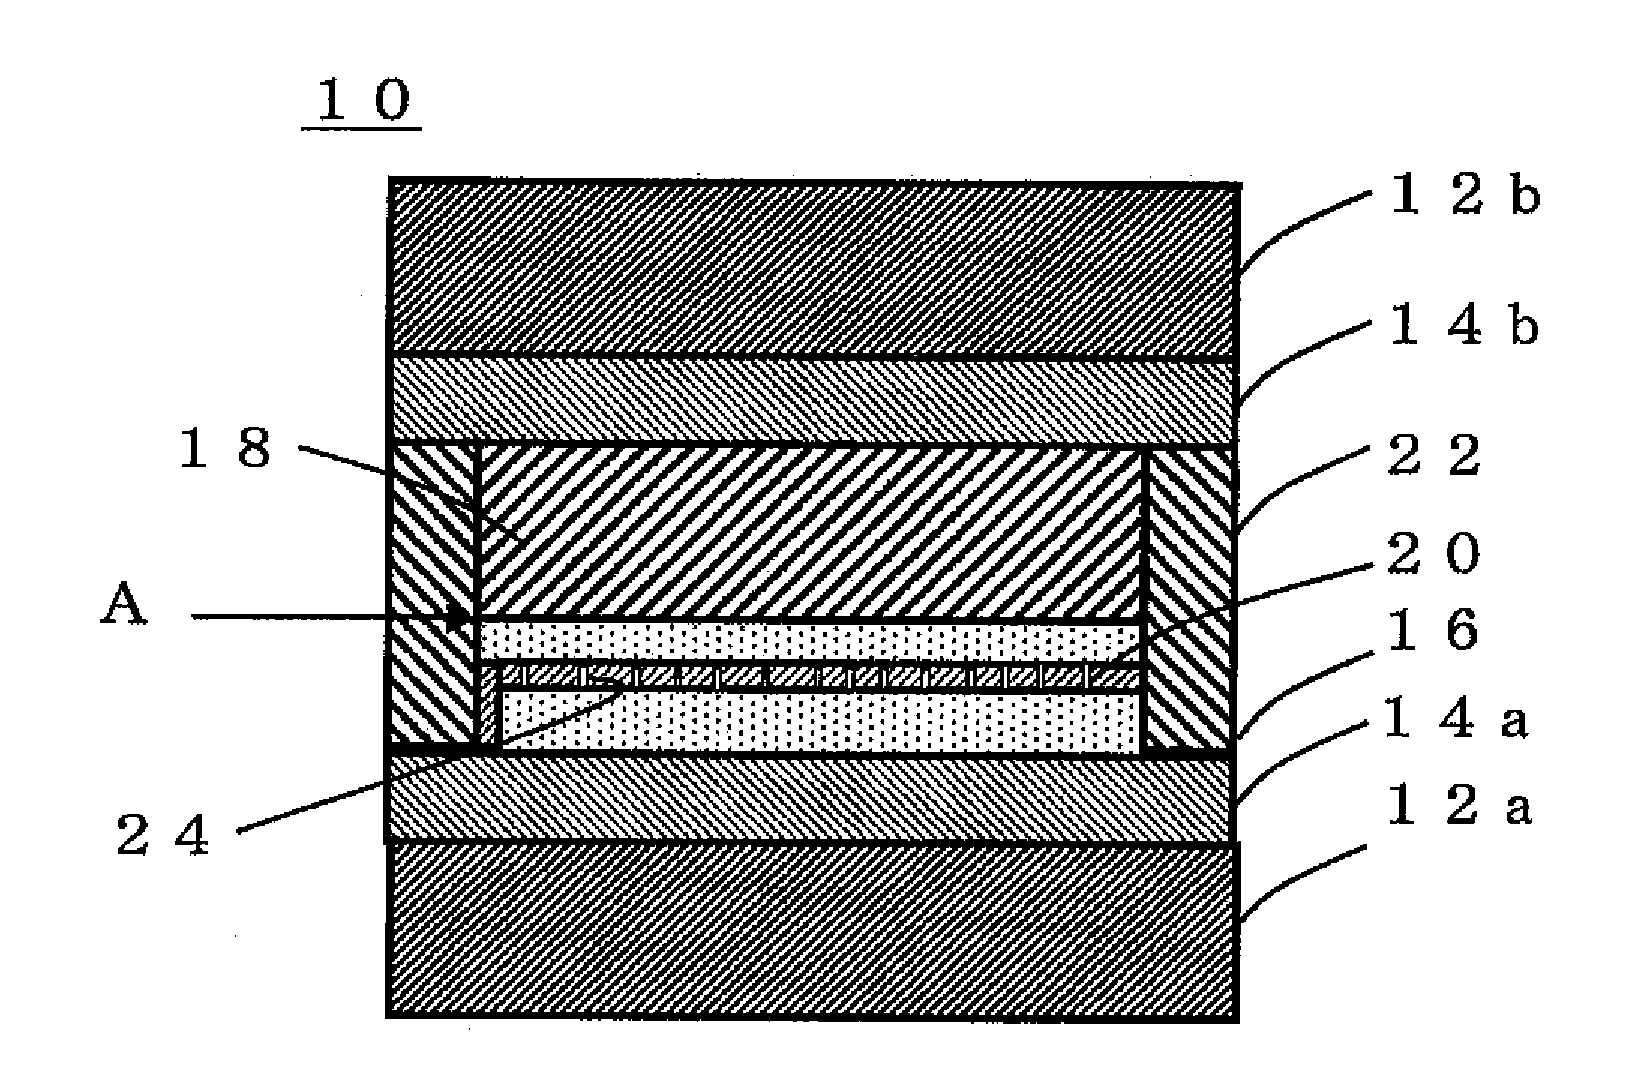 Dye-sensitized solar cell and process for producing the same